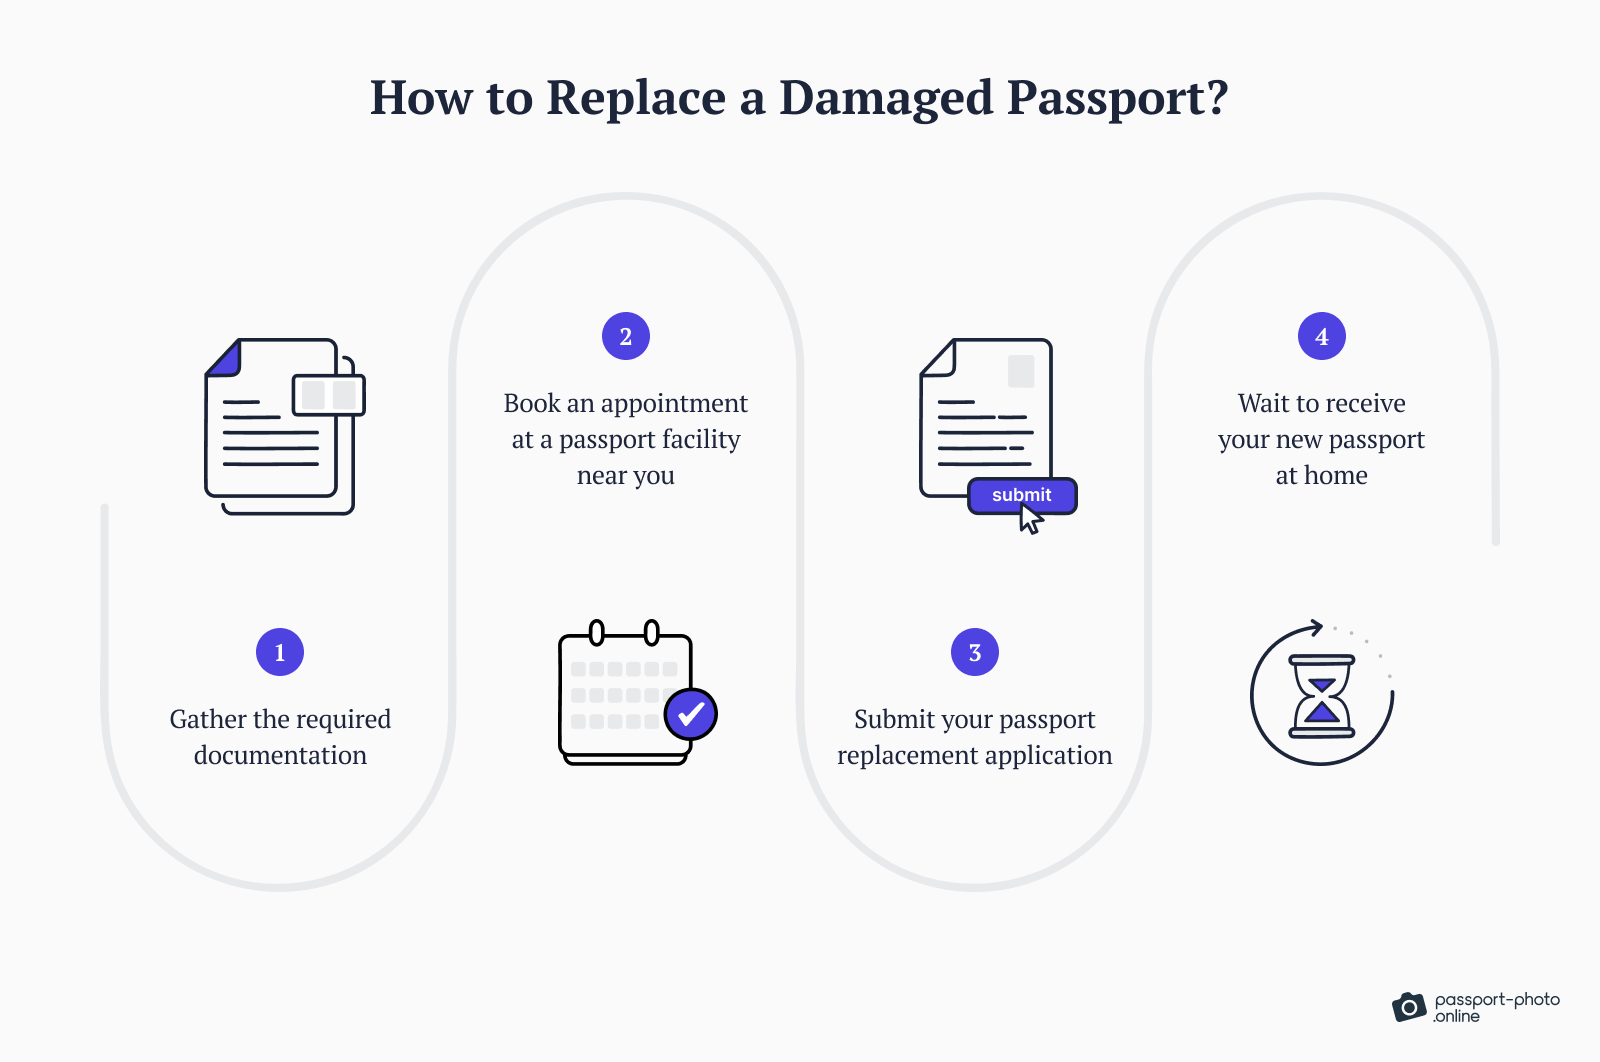 A list of steps to replace a damaged passport in white and blue color.